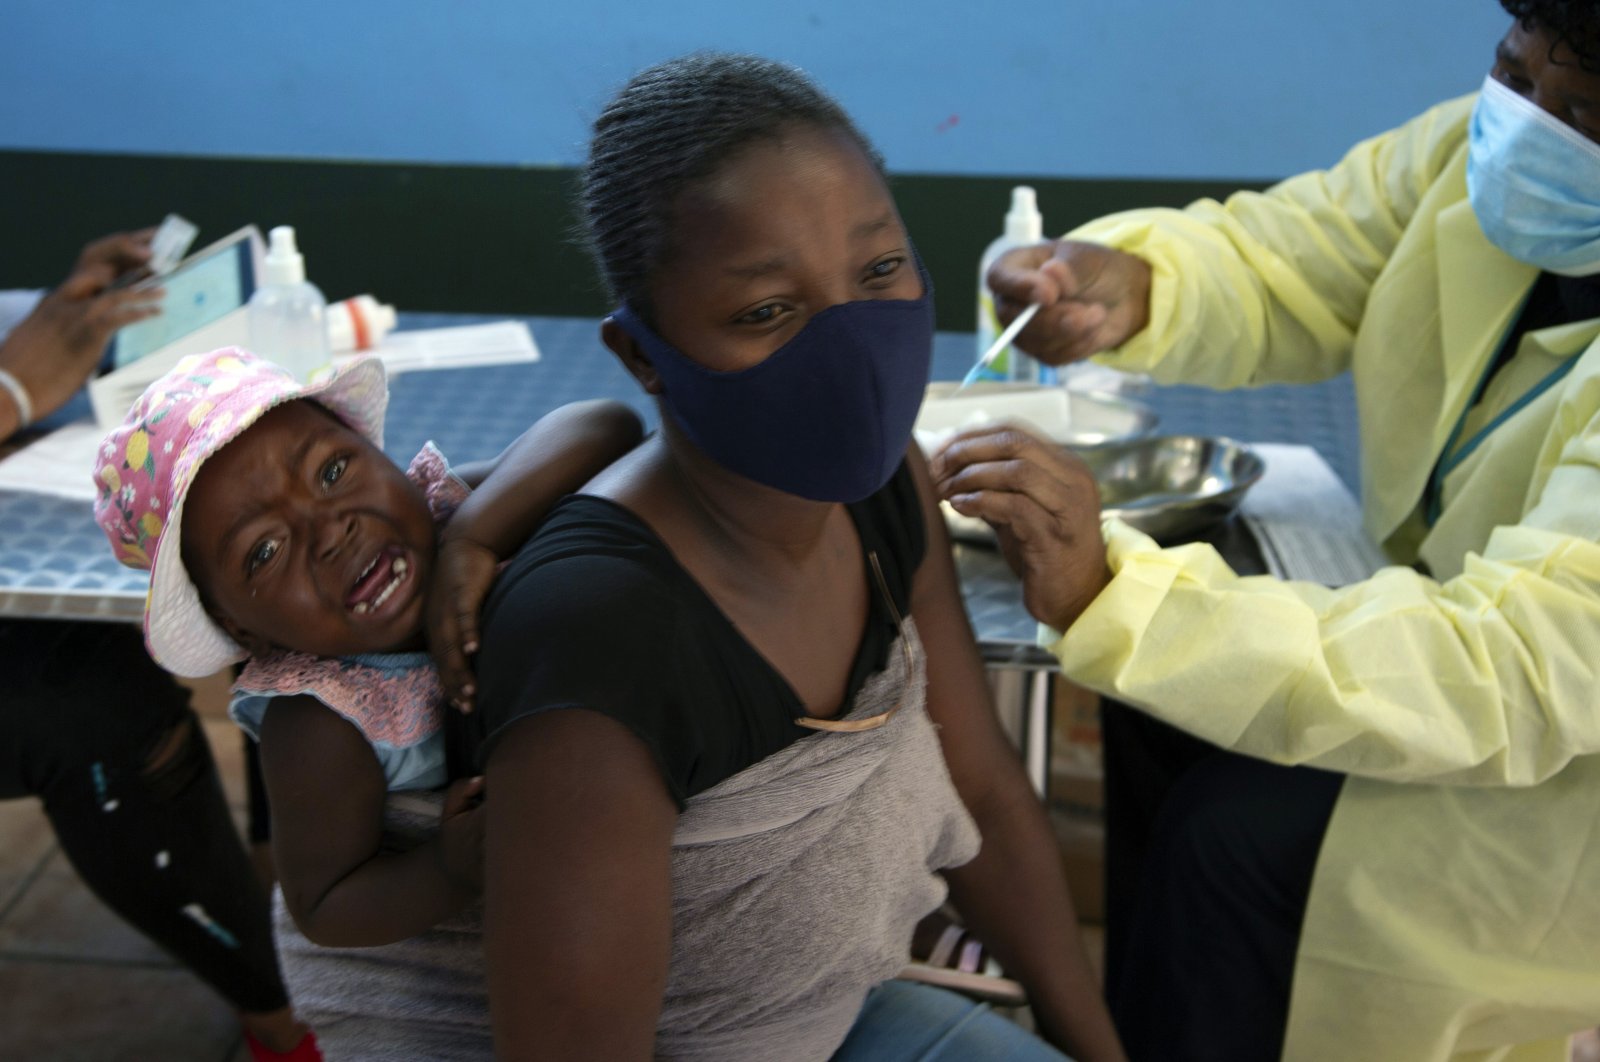 A baby cries as her mother receives her Pfizer vaccine against COVID-19, in Diepsloot Township near Johannesburg, Oct. 21, 2021. (AP File Photo)